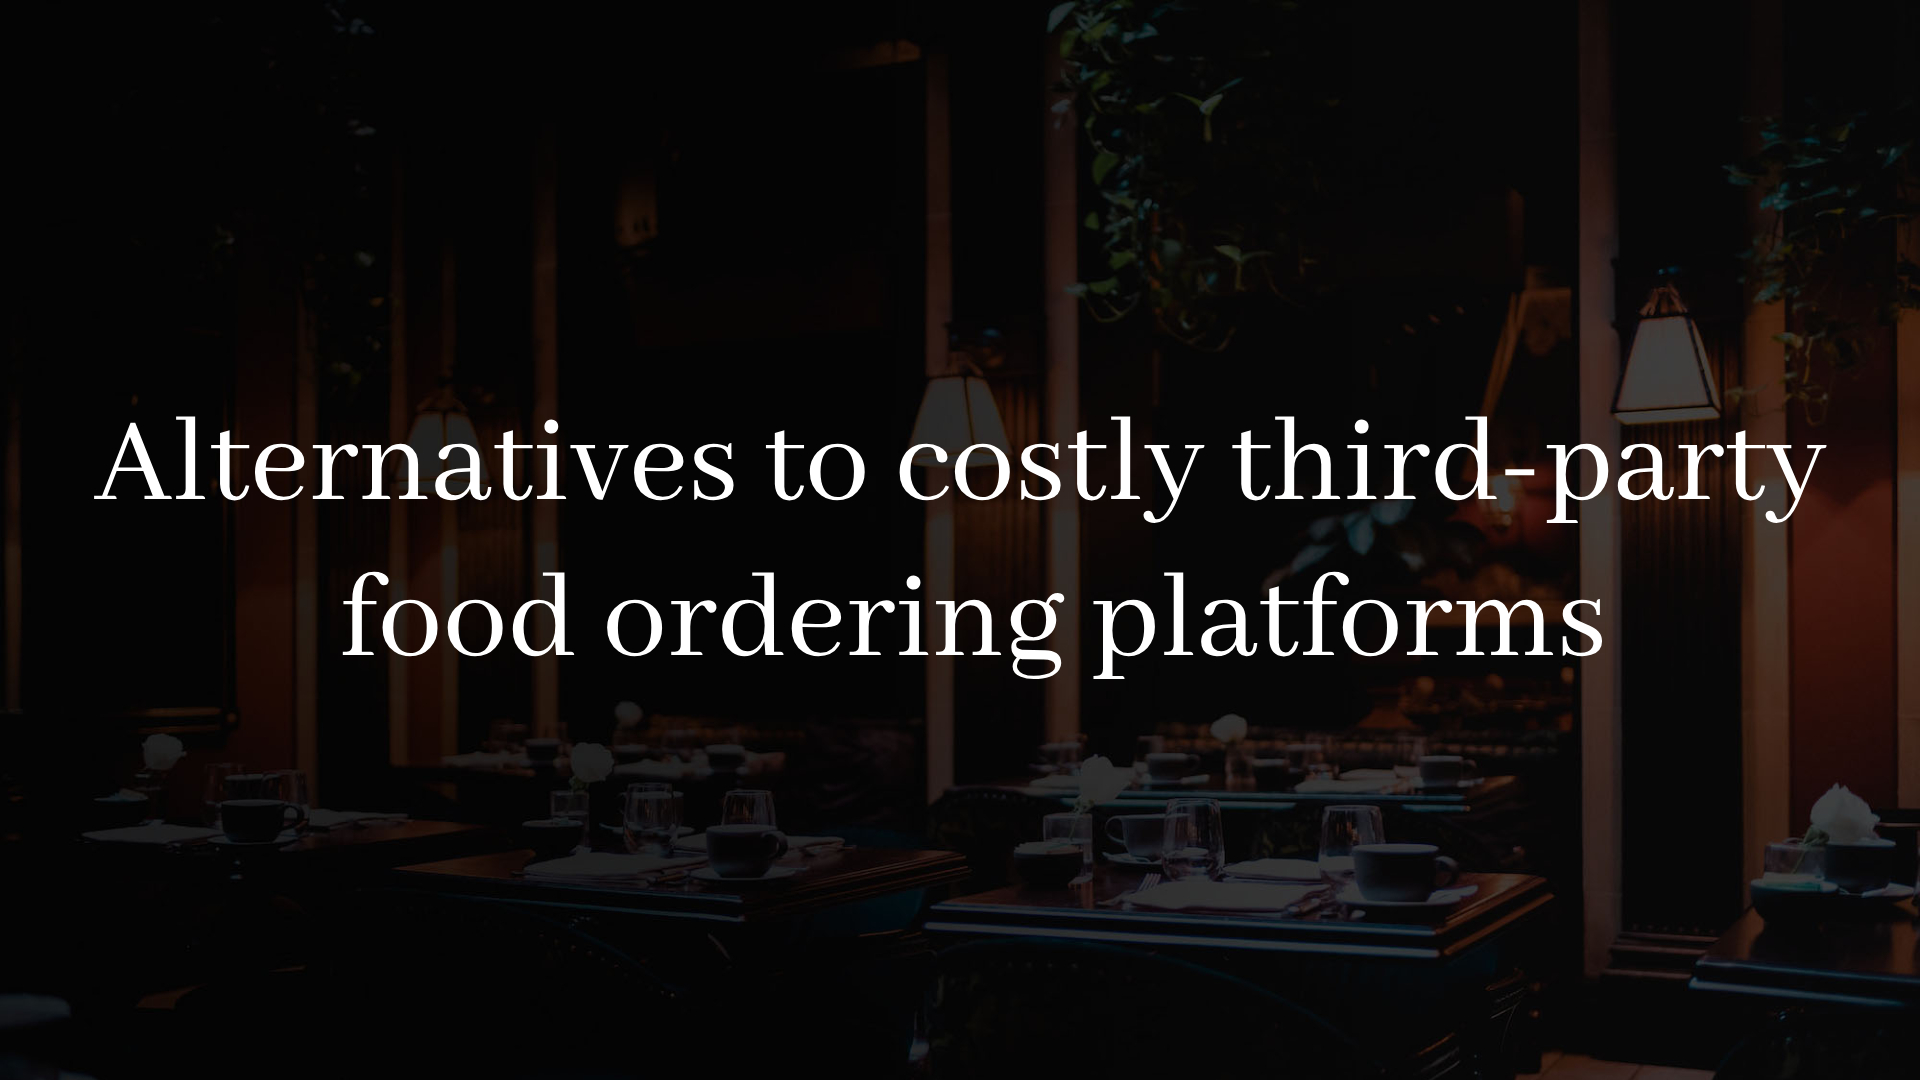 Alternatives to costly third-party food ordering platforms